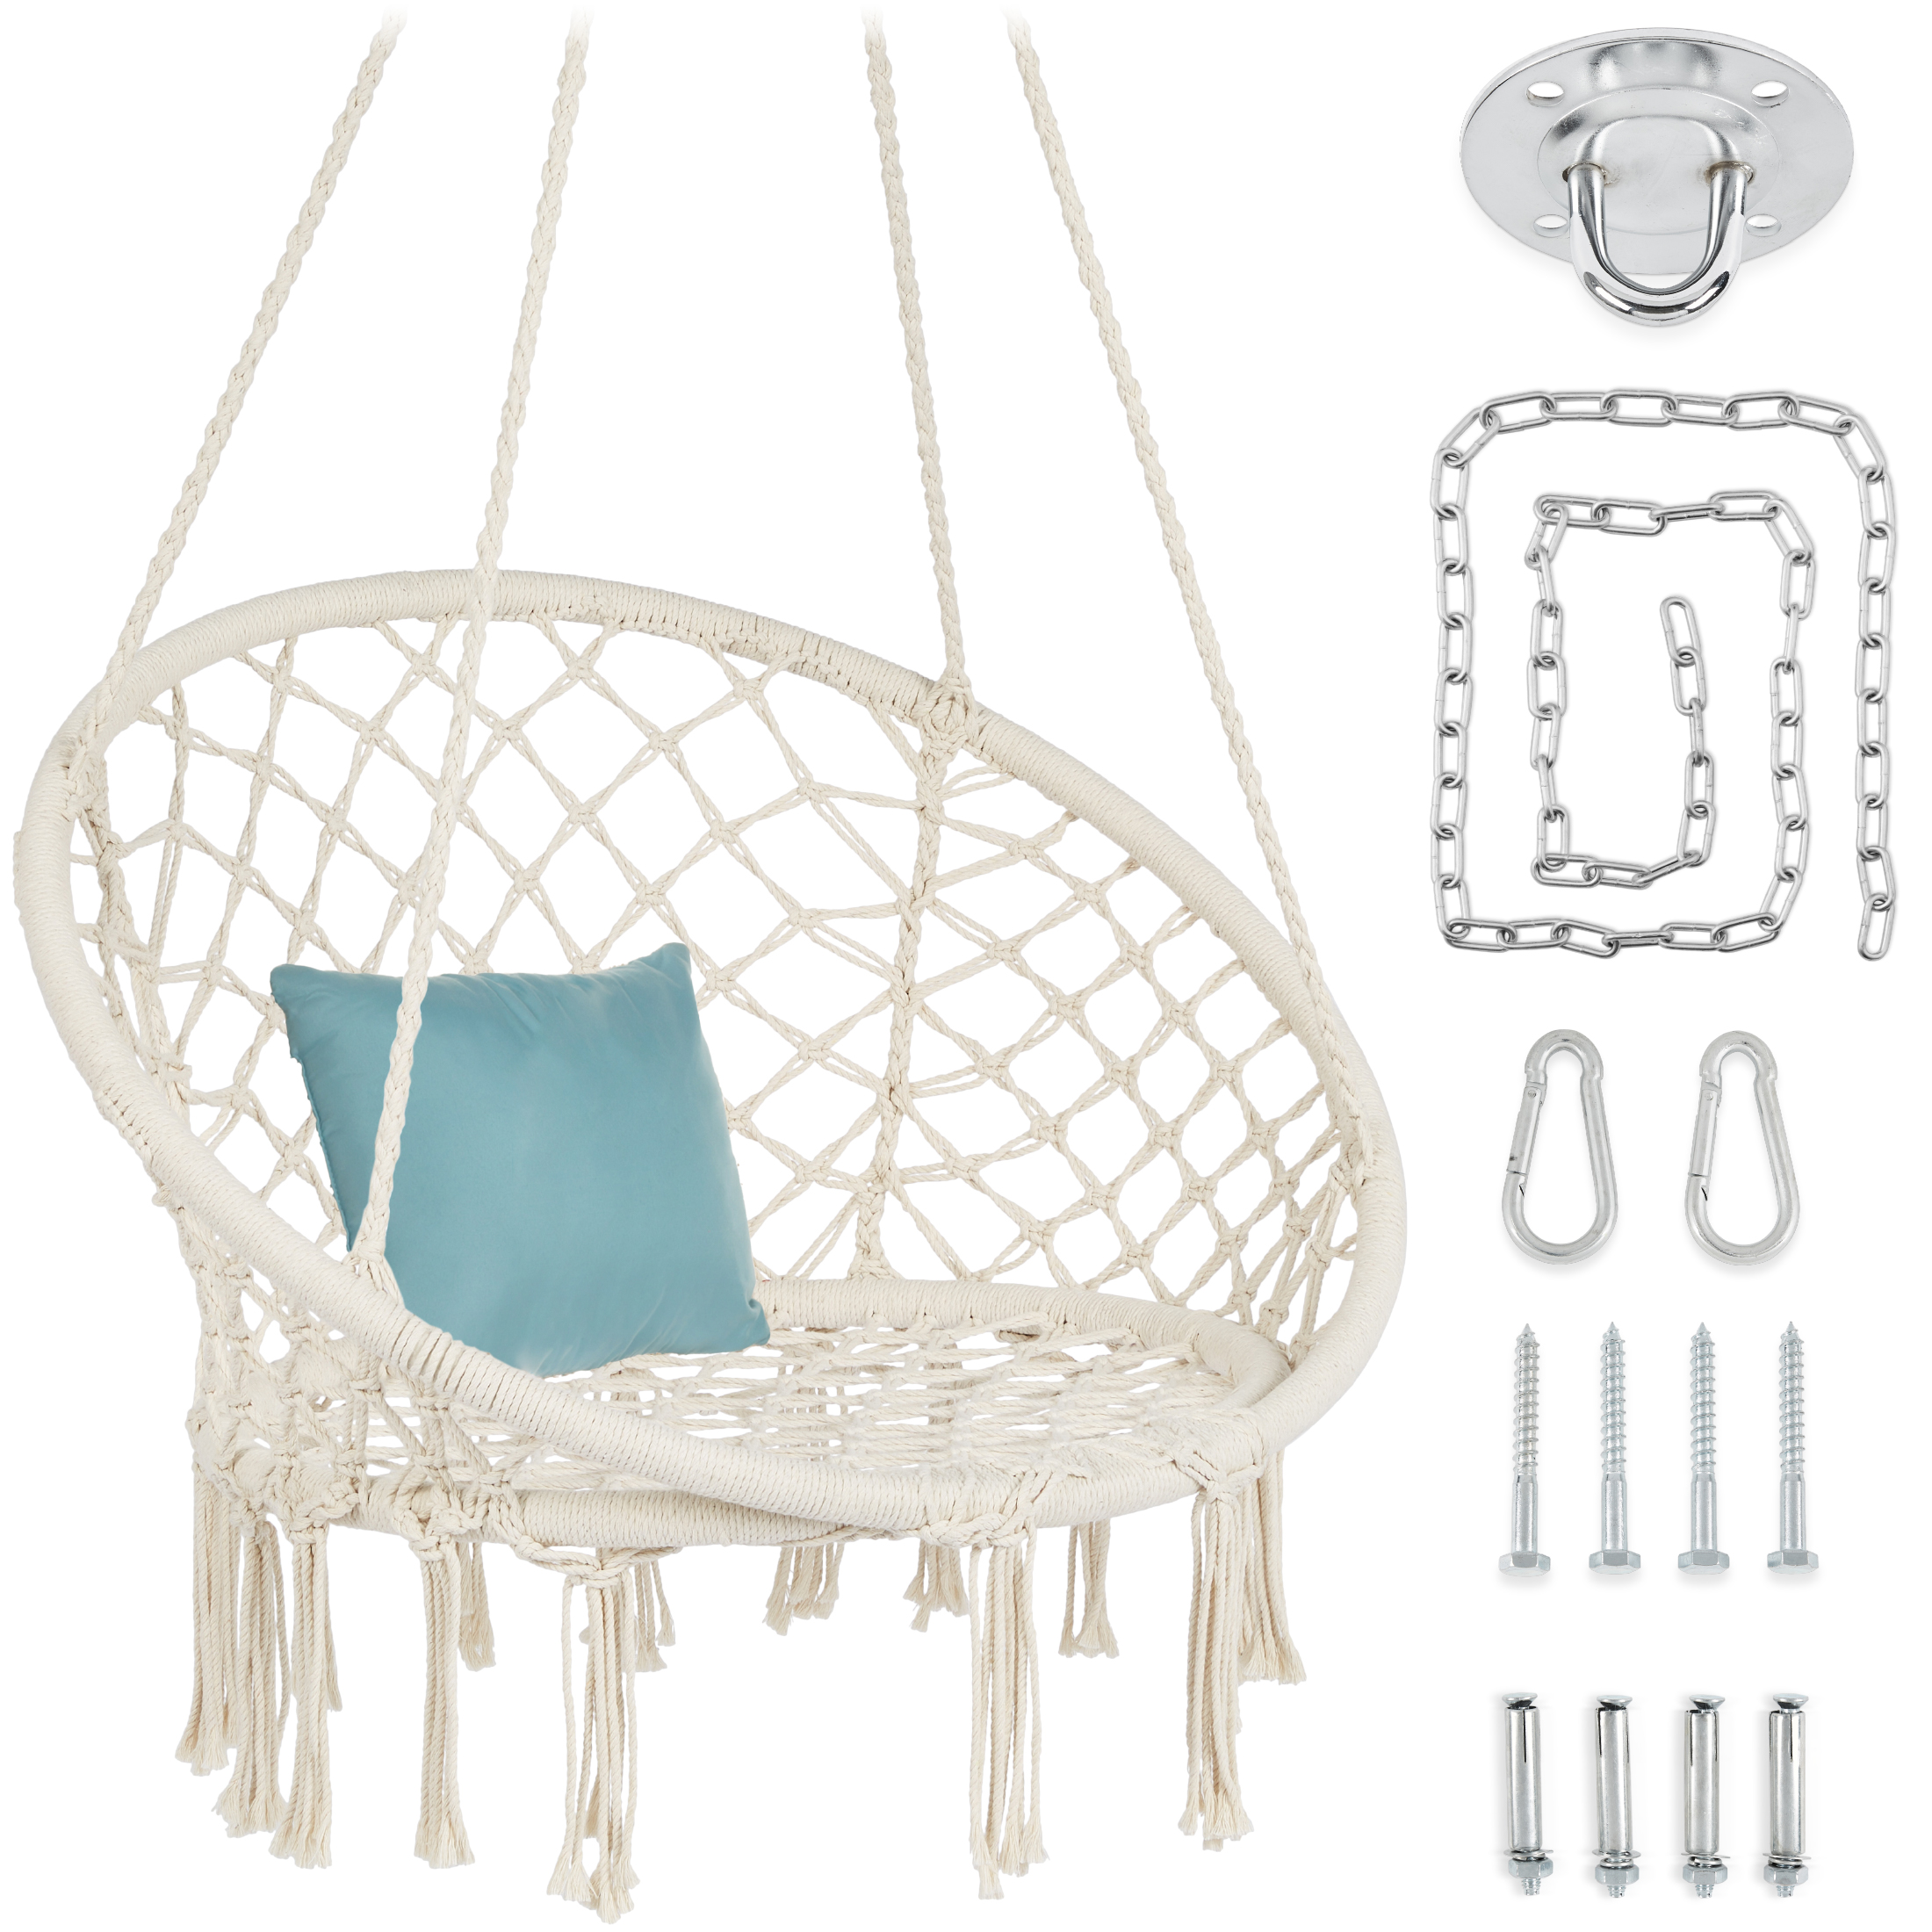 Best Choice Products Macrame Hanging Chair, Handwoven Cotton Hammock Swing w/ Mounting Hardware - Beige - image 1 of 8